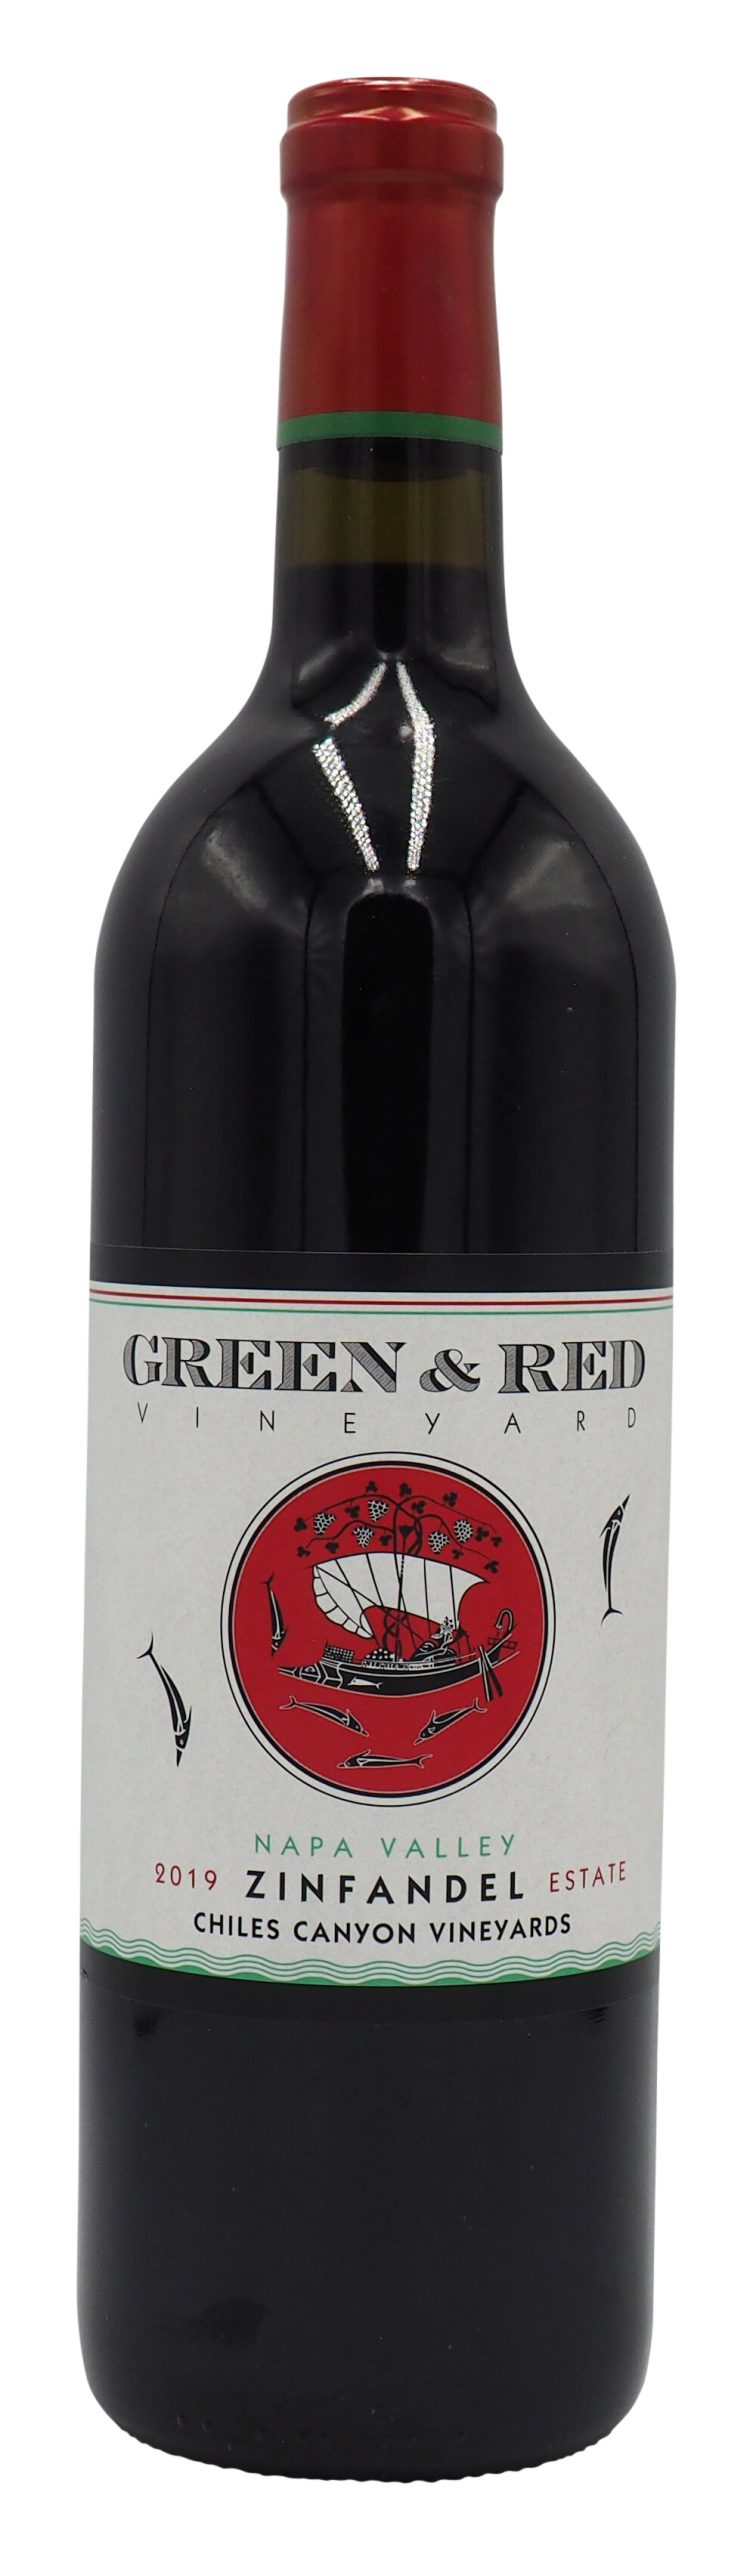 Green & Red Zinfandel 2019, Chiles Canyon Vineyards, Napa Valley